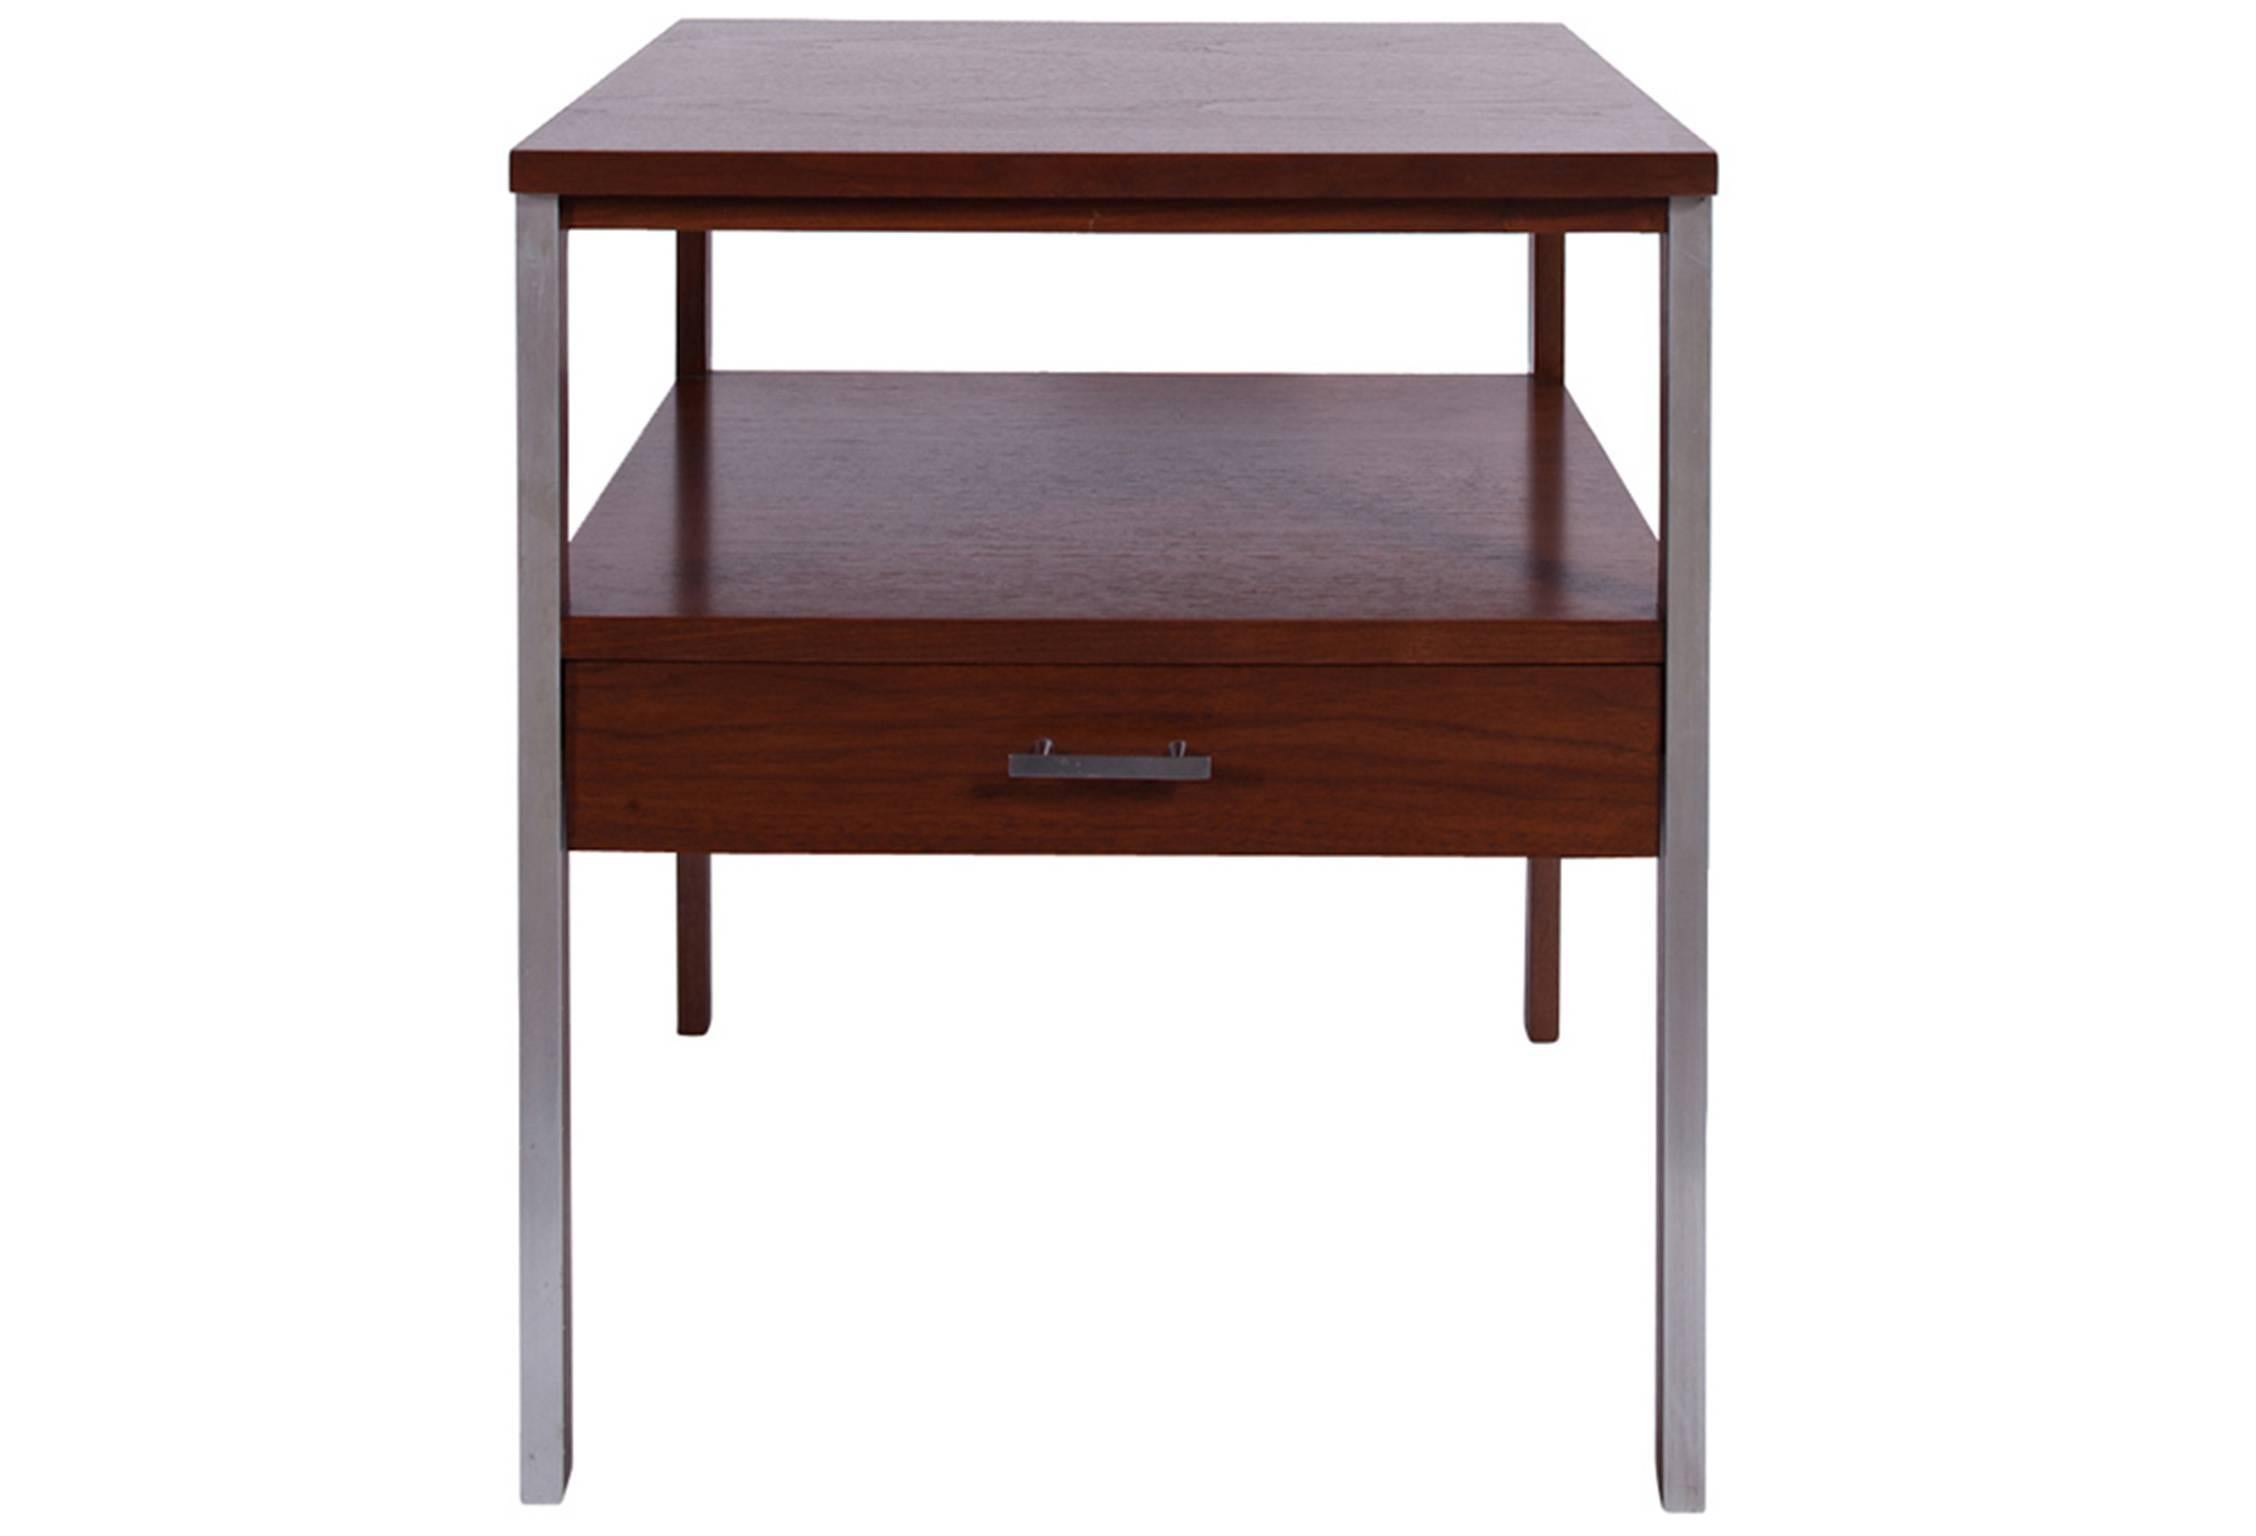 Walnut and brushed steel side table by Paul McCobb for Calvin Grand Rapids.
The back has the same finish than the front.